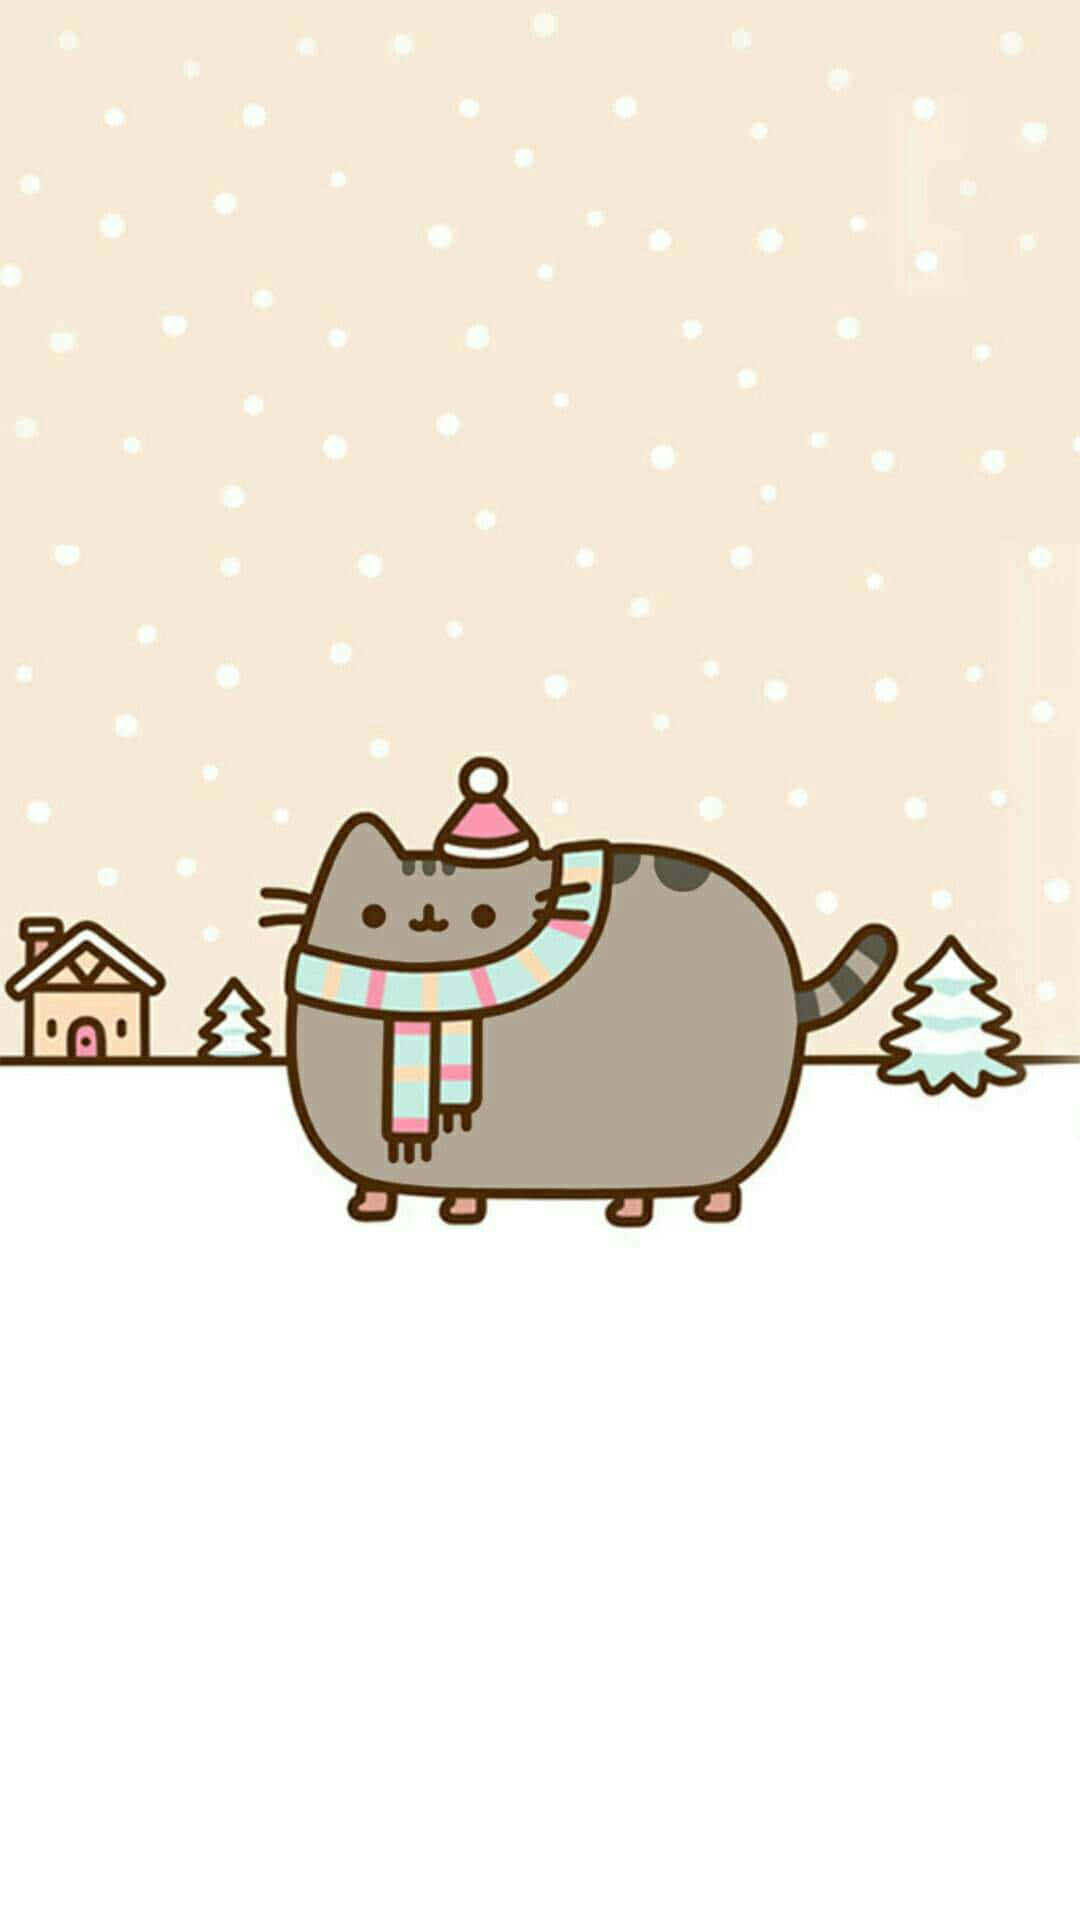 Get Creative With Your Online Presence - Introducing Pusheen!